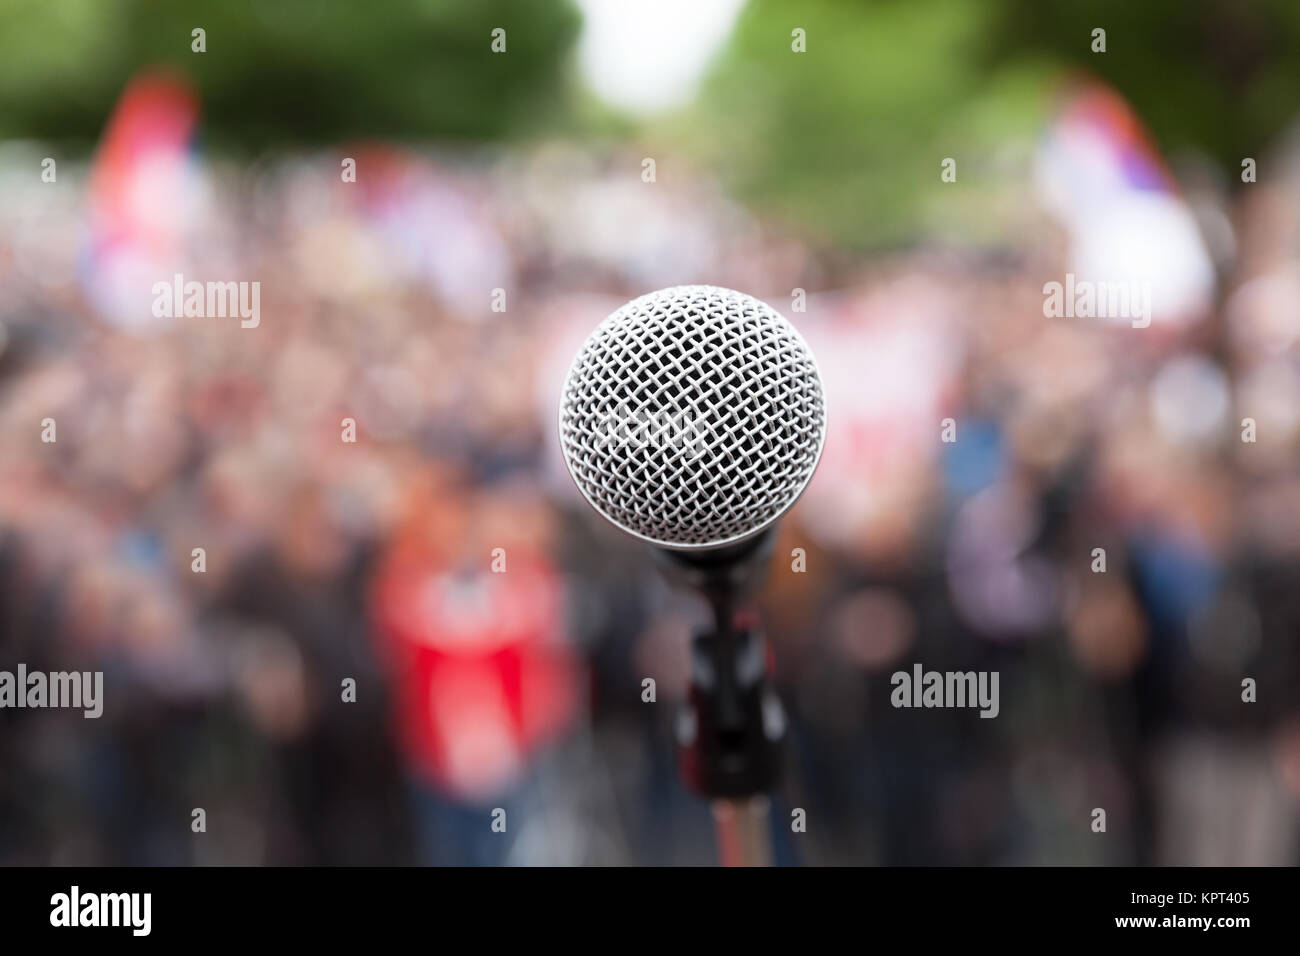 Microphone in focus against blurred audience. Political rally. Stock Photo